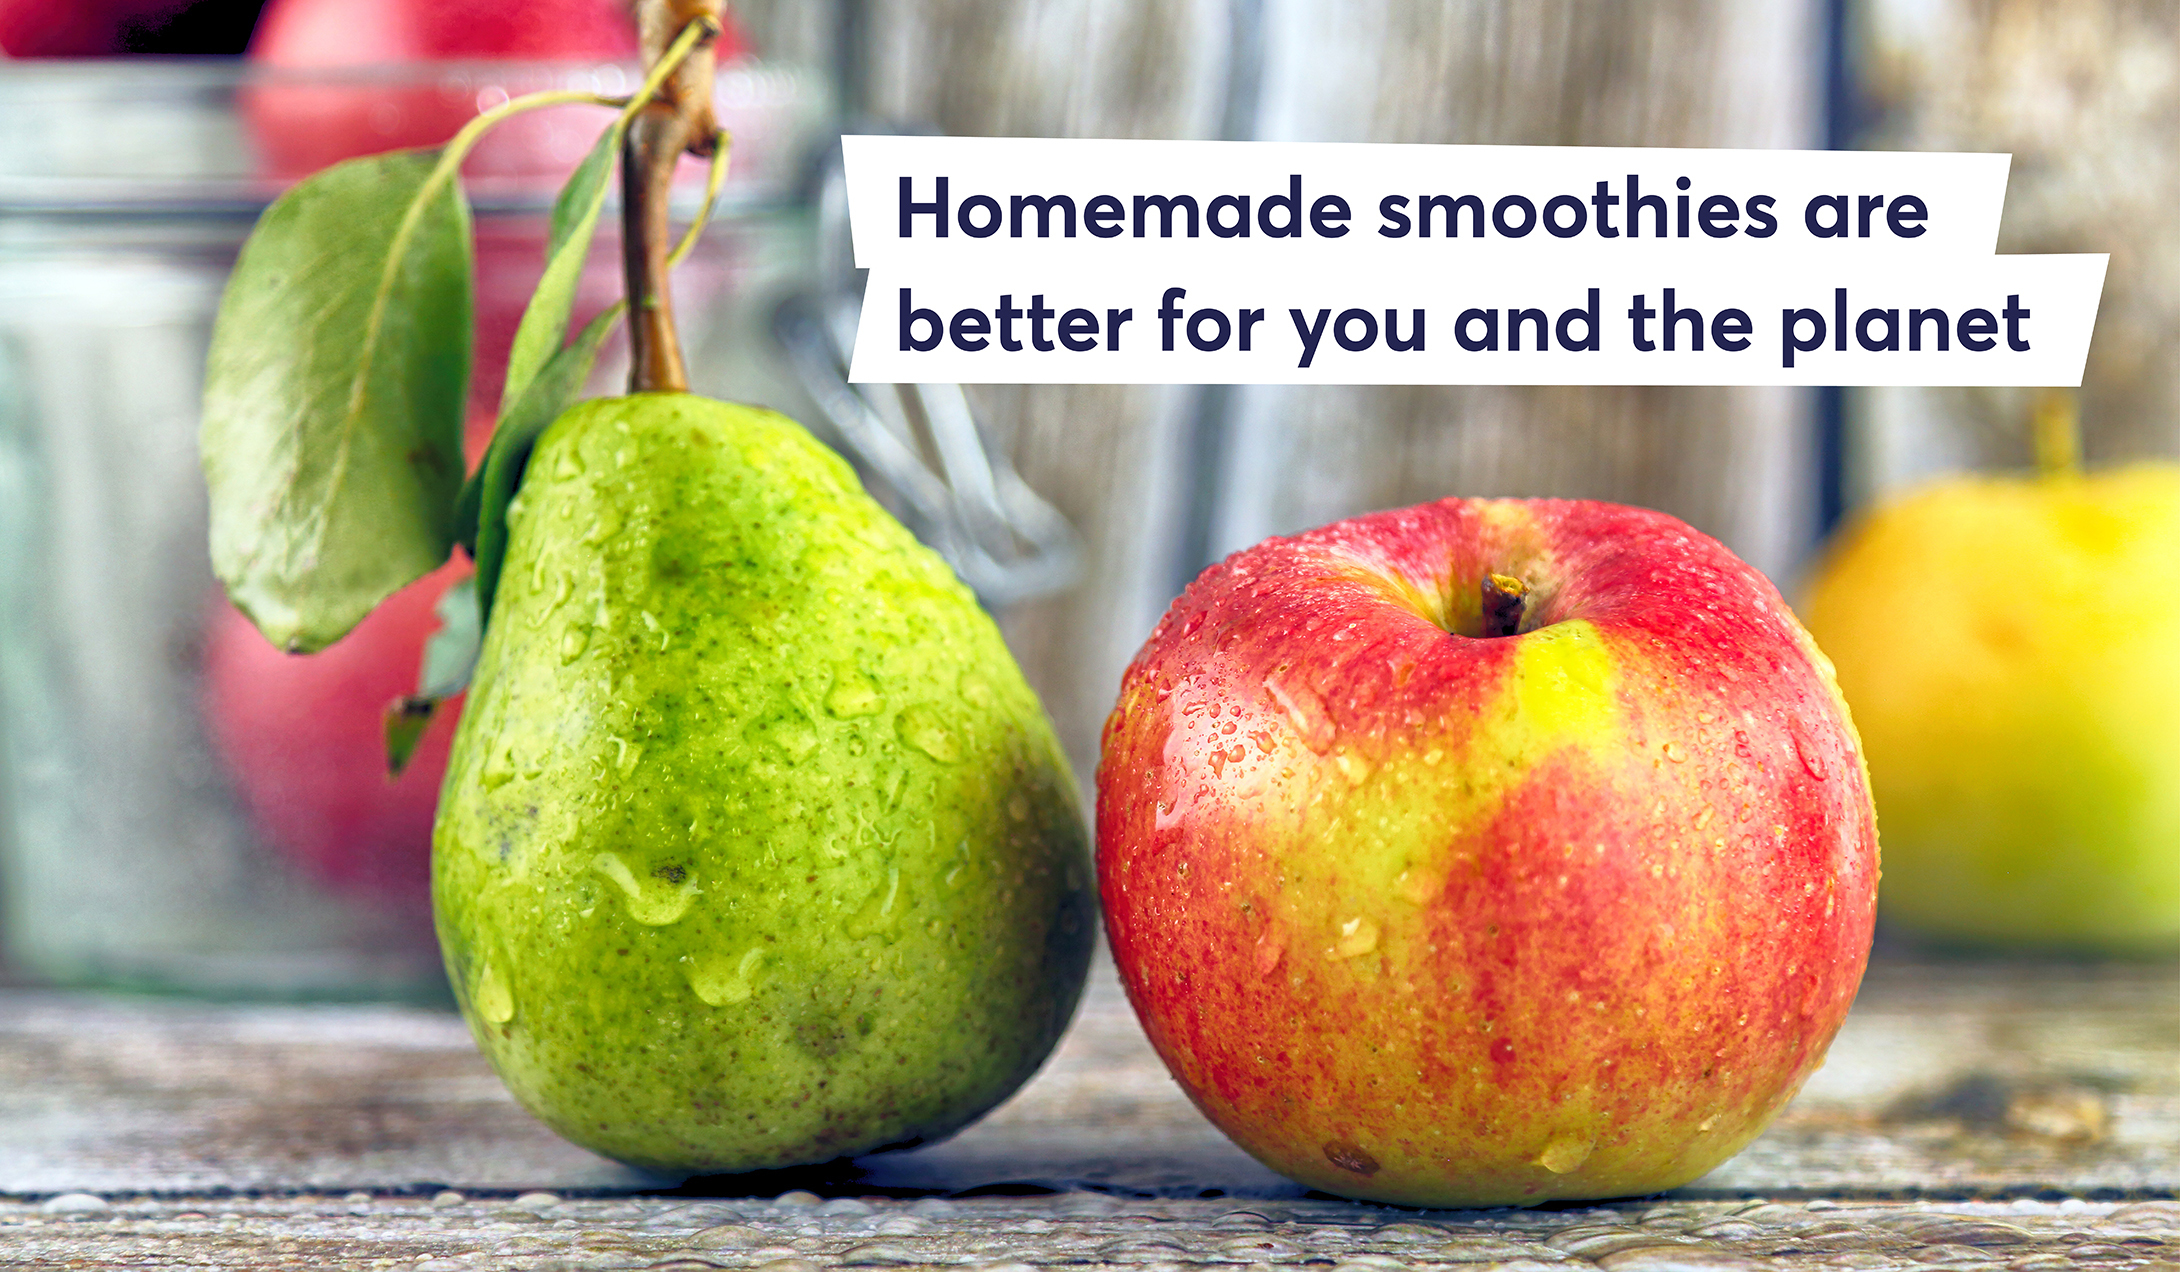 Try our apple and pear smoothie recipe